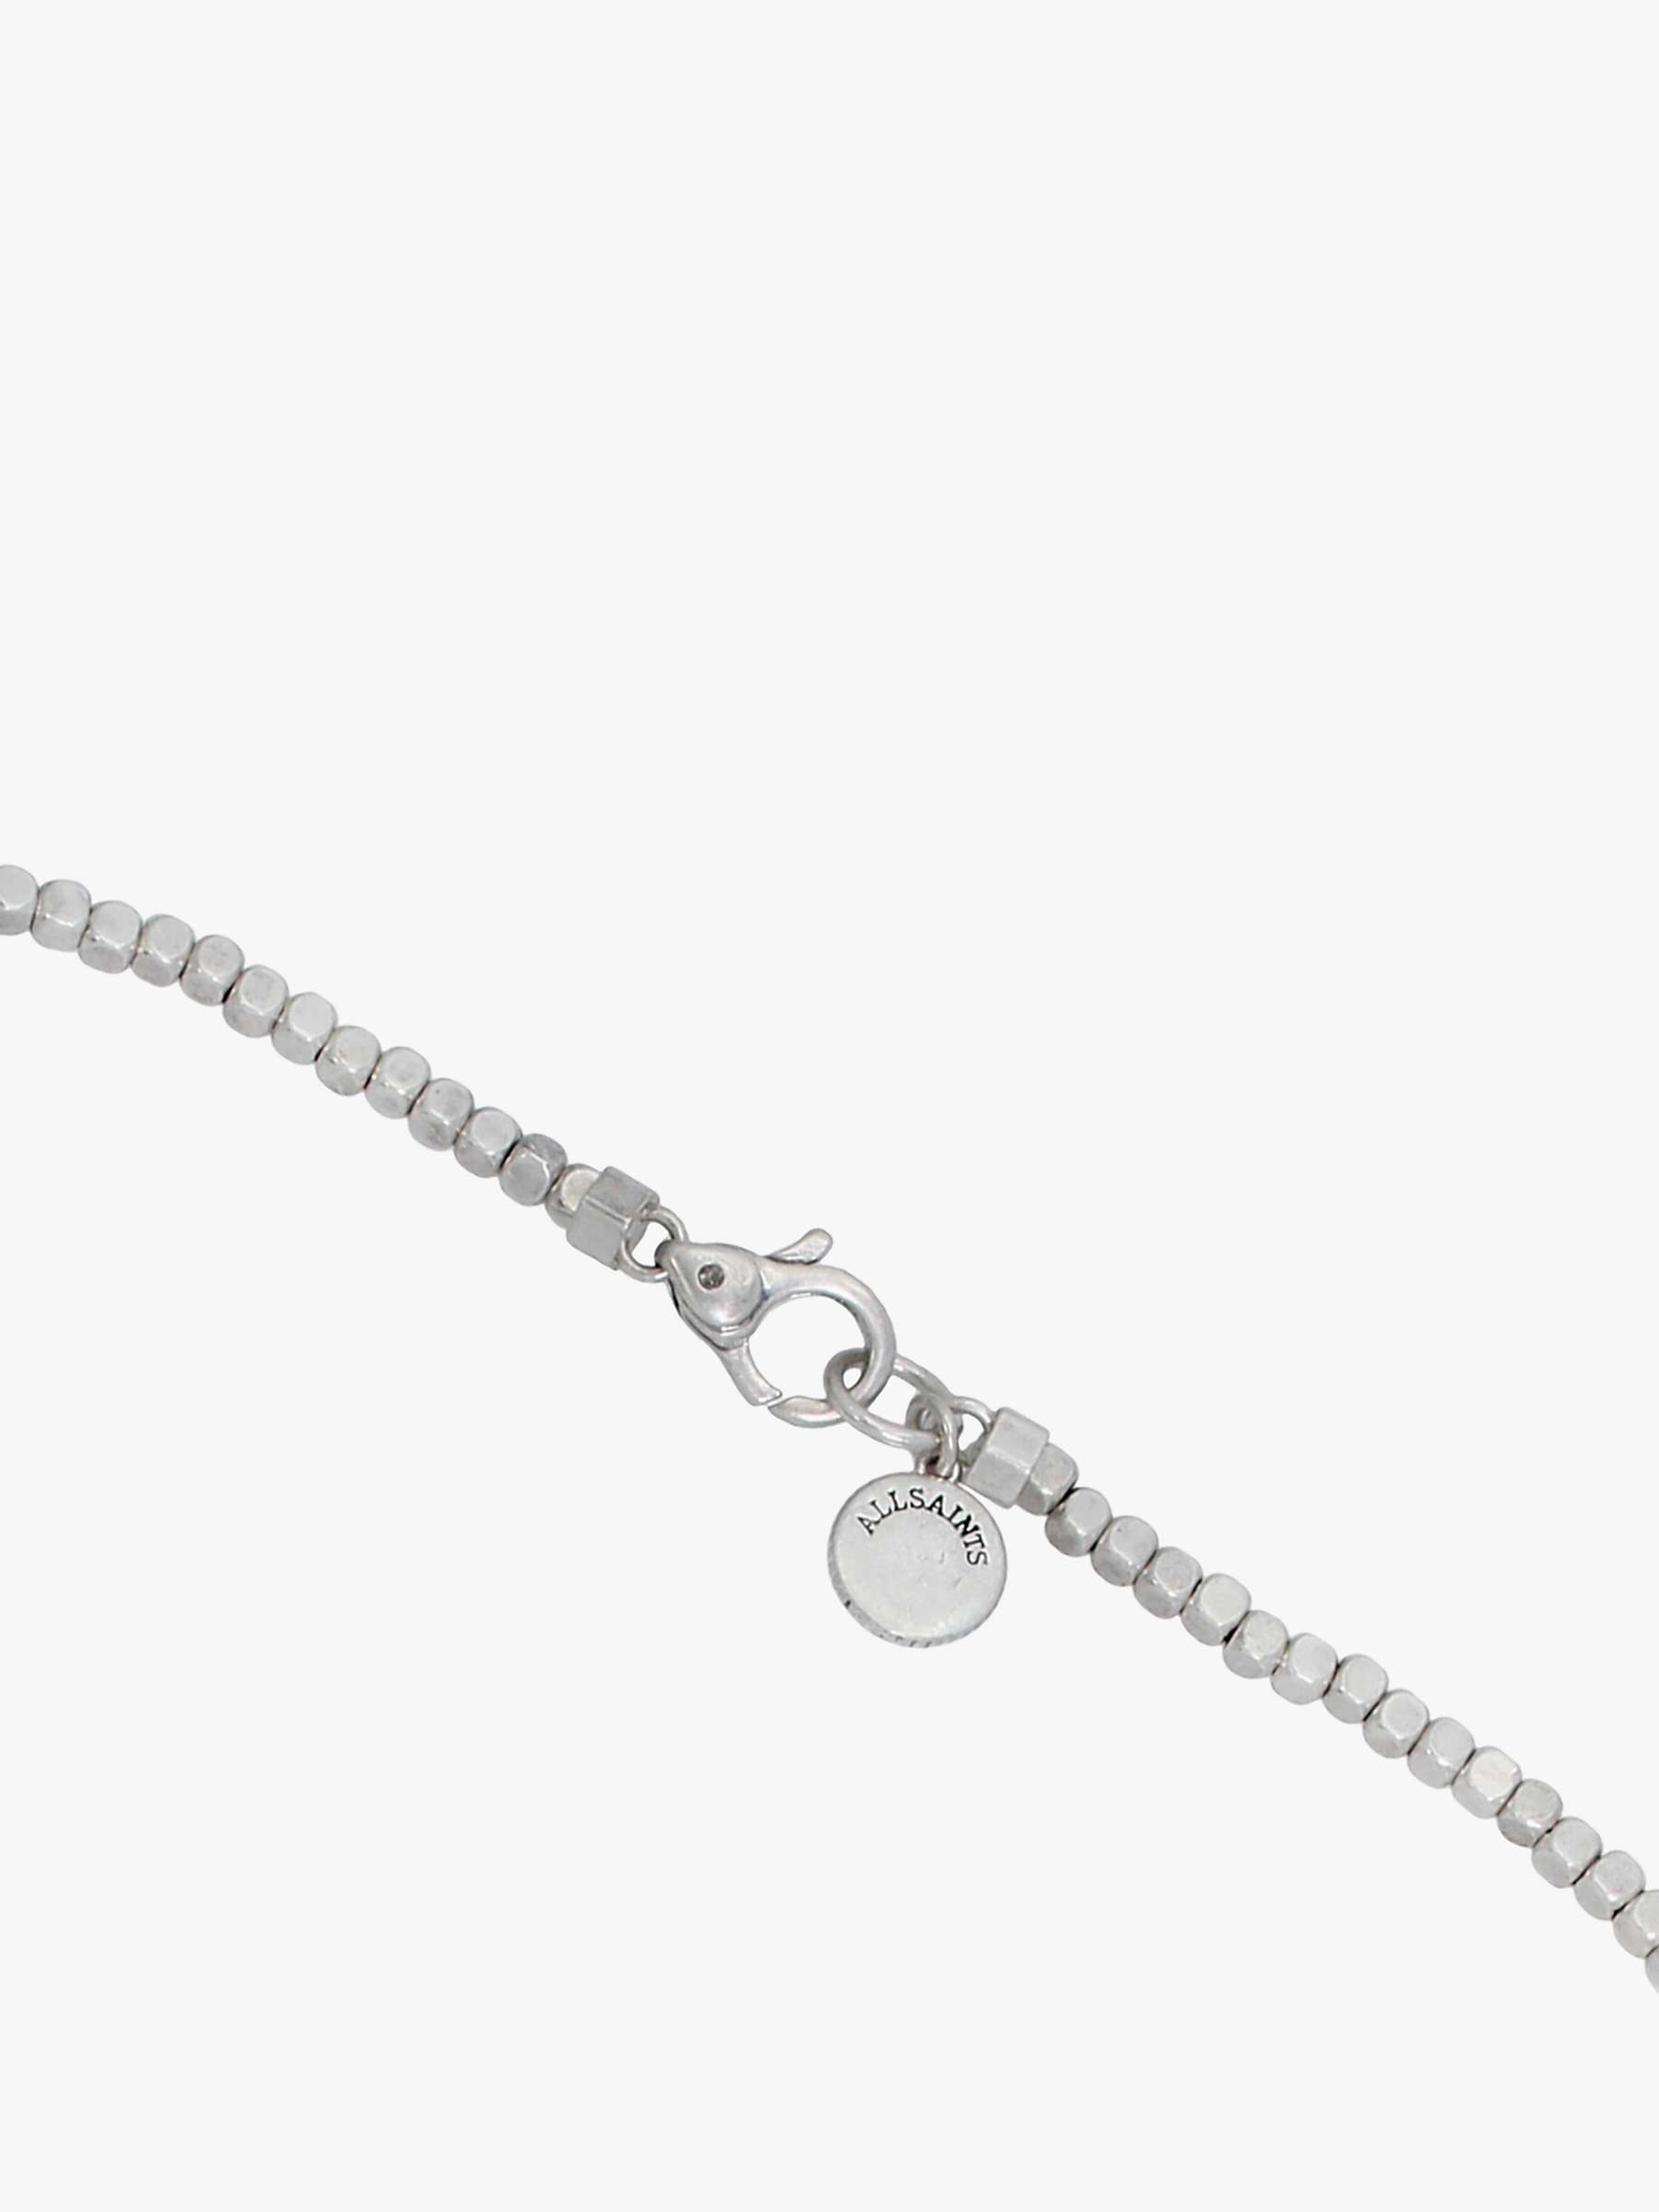 Buy AllSaints Beaded Necklace, Warm Silver Online at johnlewis.com